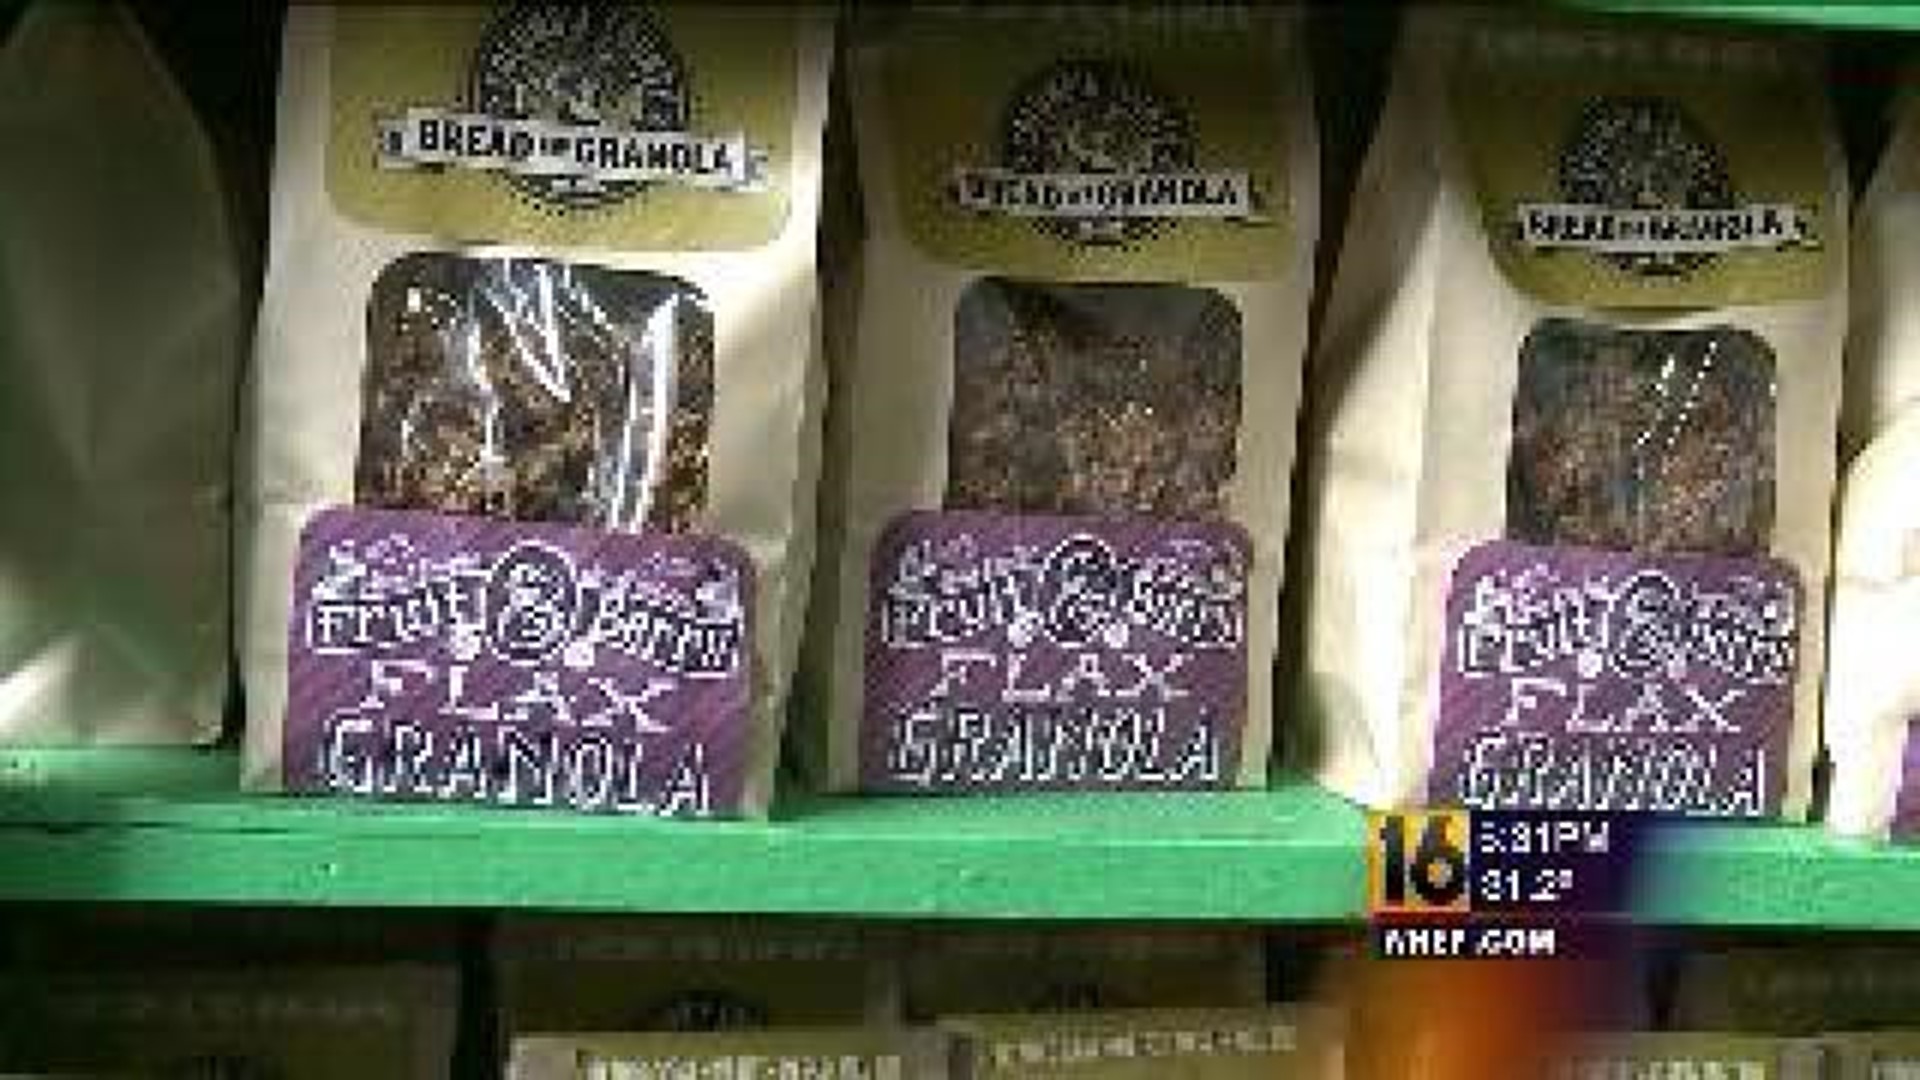 Local Business Scores Big with Granola